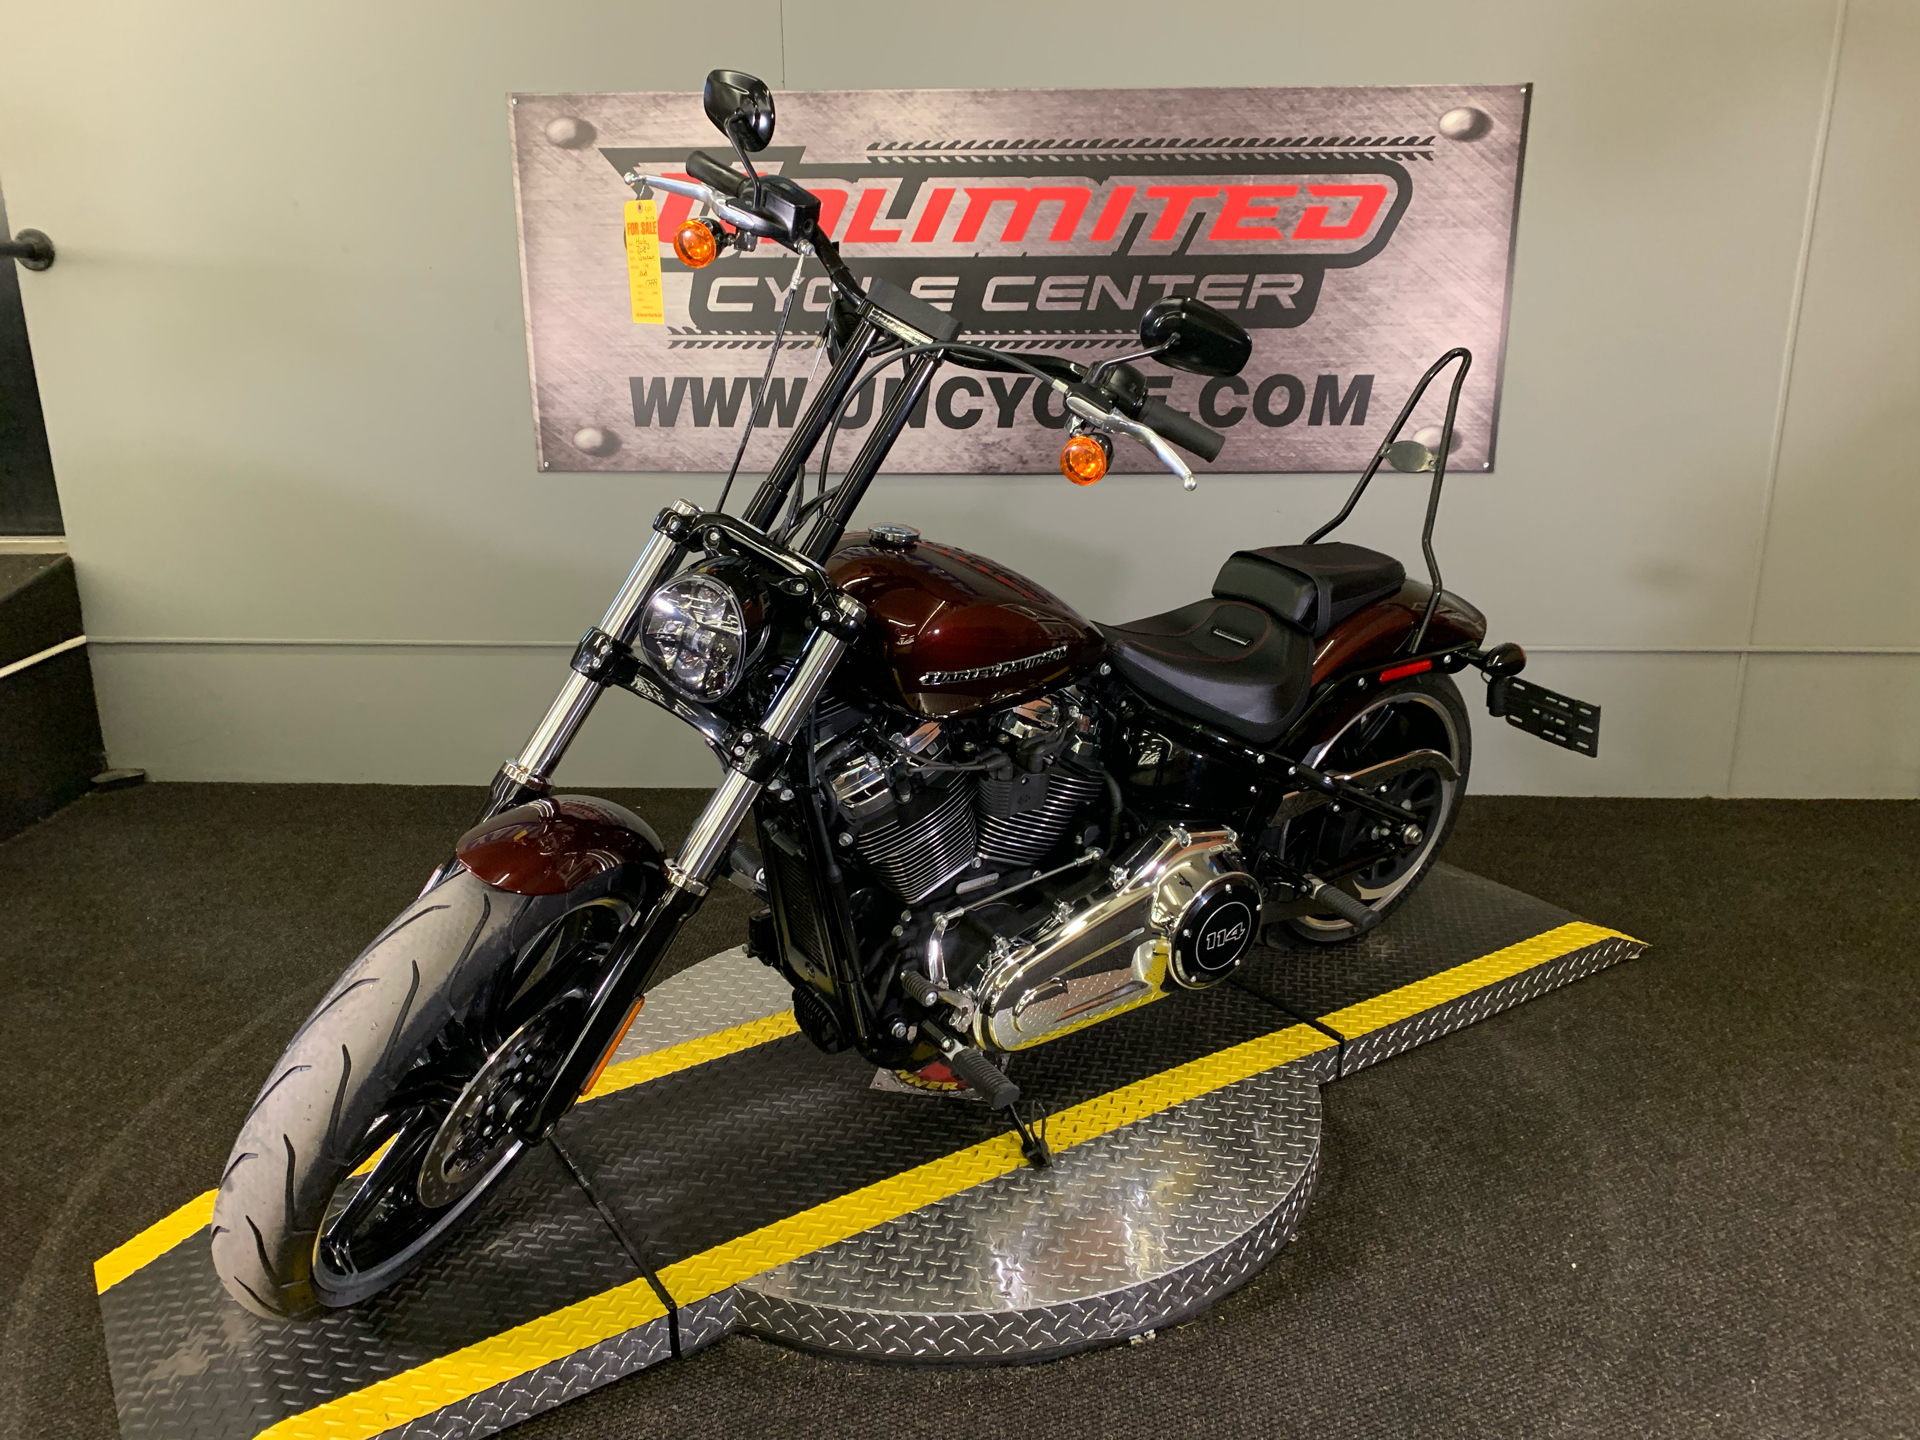 Used 2018 Harley Davidson Breakout 114 Motorcycles In Tyrone Pa 021774 Twisted Cherry